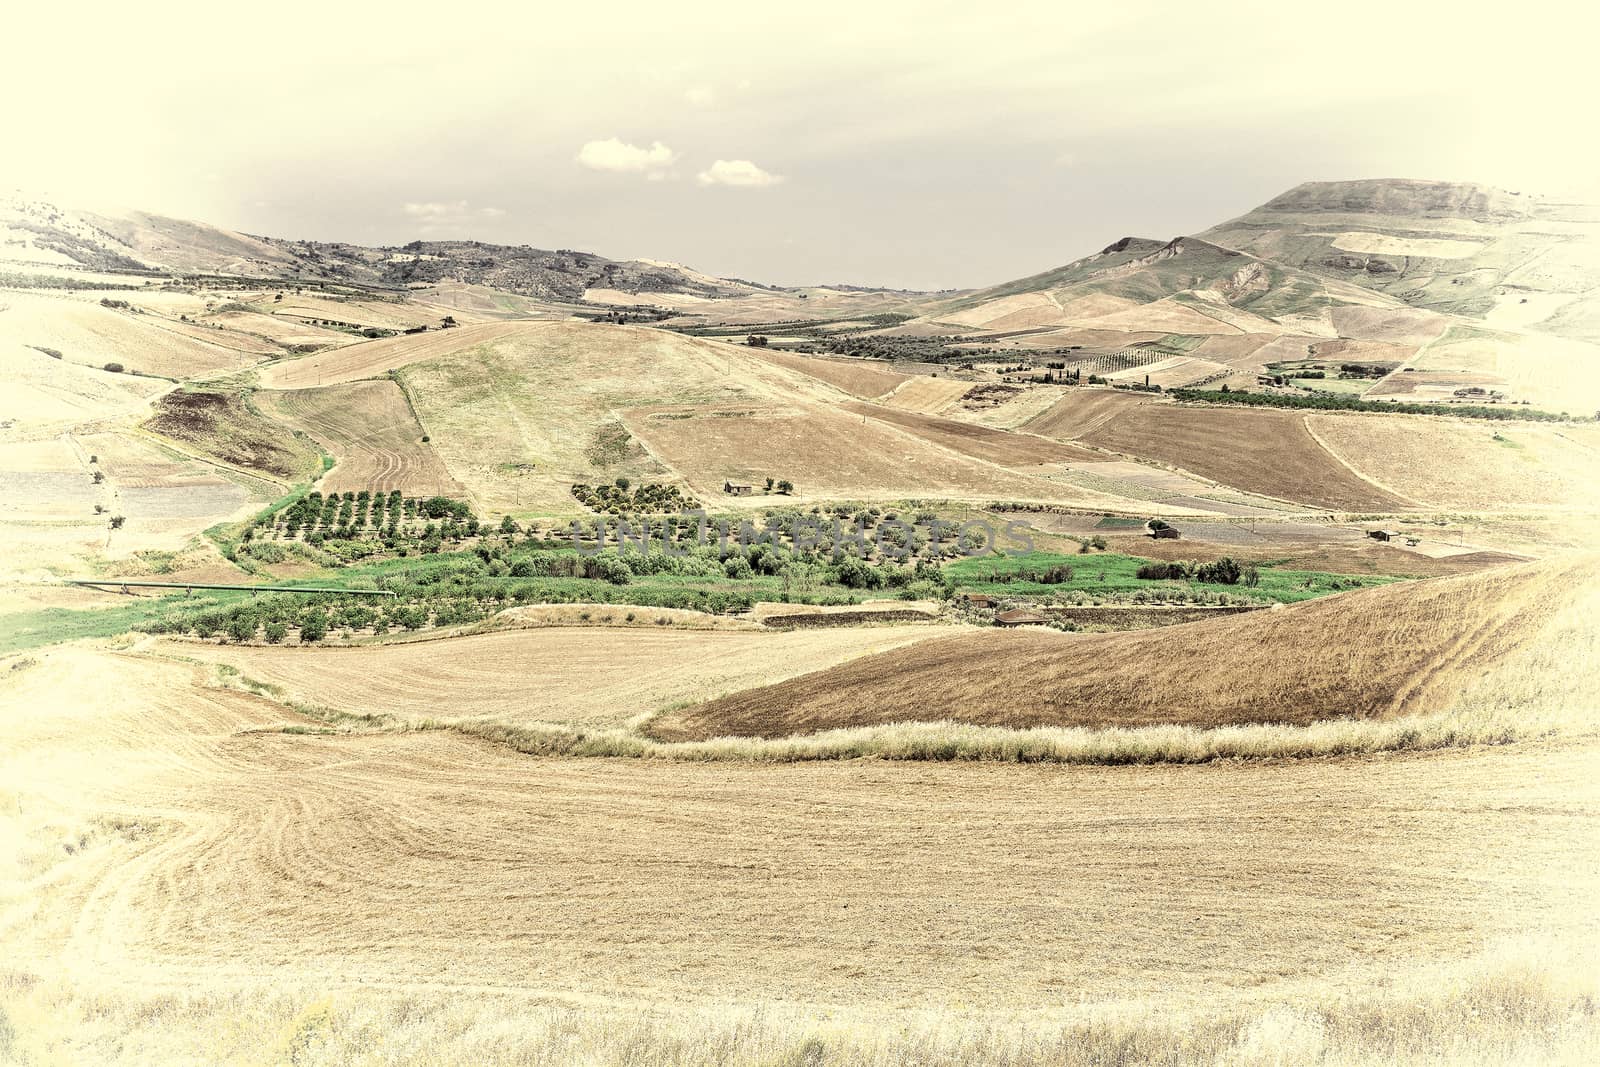 Stubble Fields on the Hills of Sicily, Retro Image Filtered Style